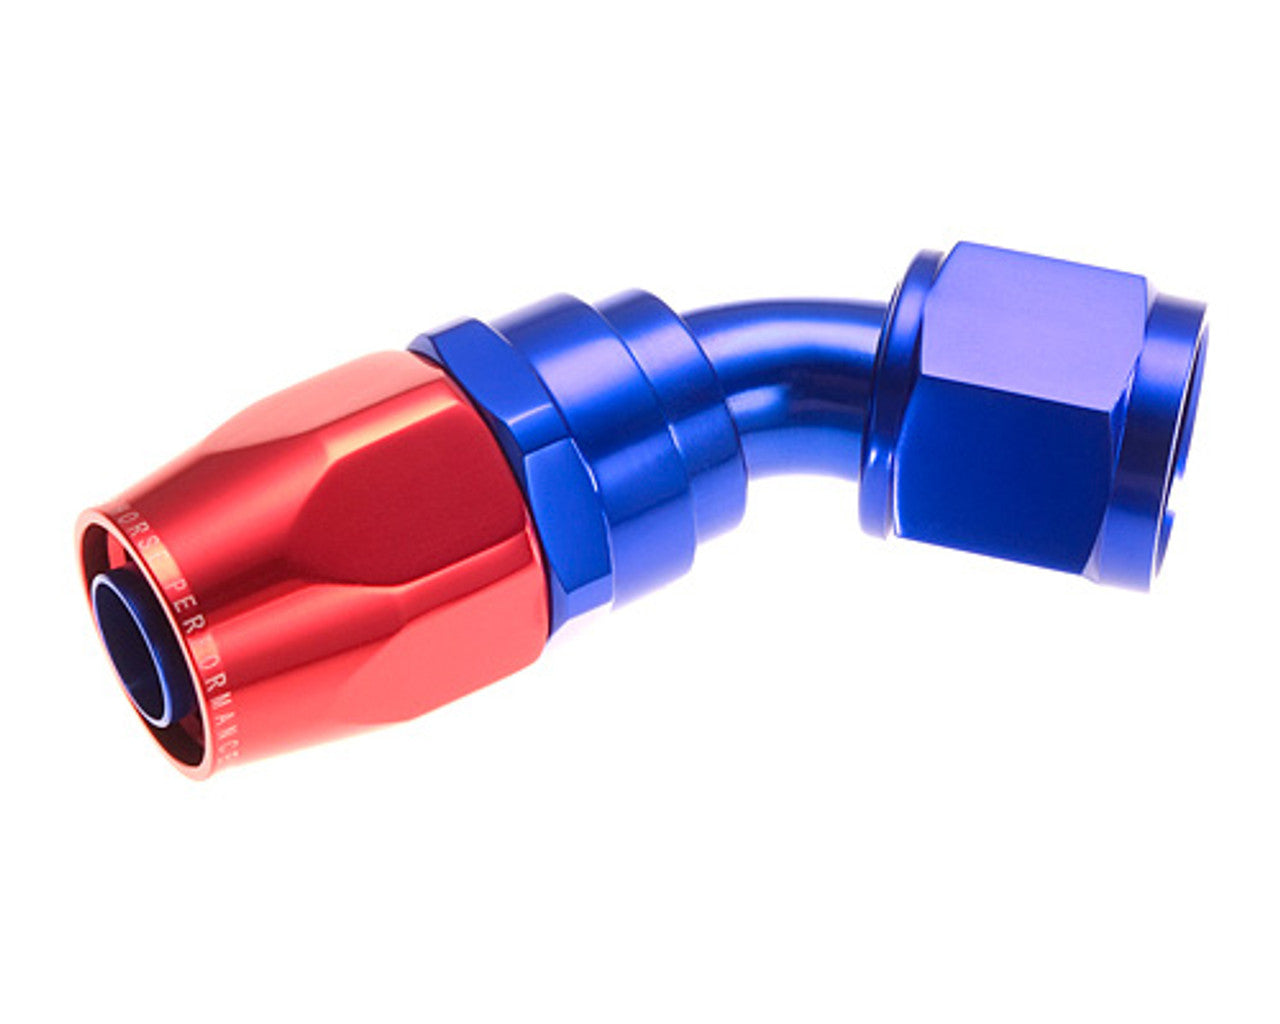 Redhorse Performance 1045-20-1 -20 45 deg double swivel hose end - red and blue